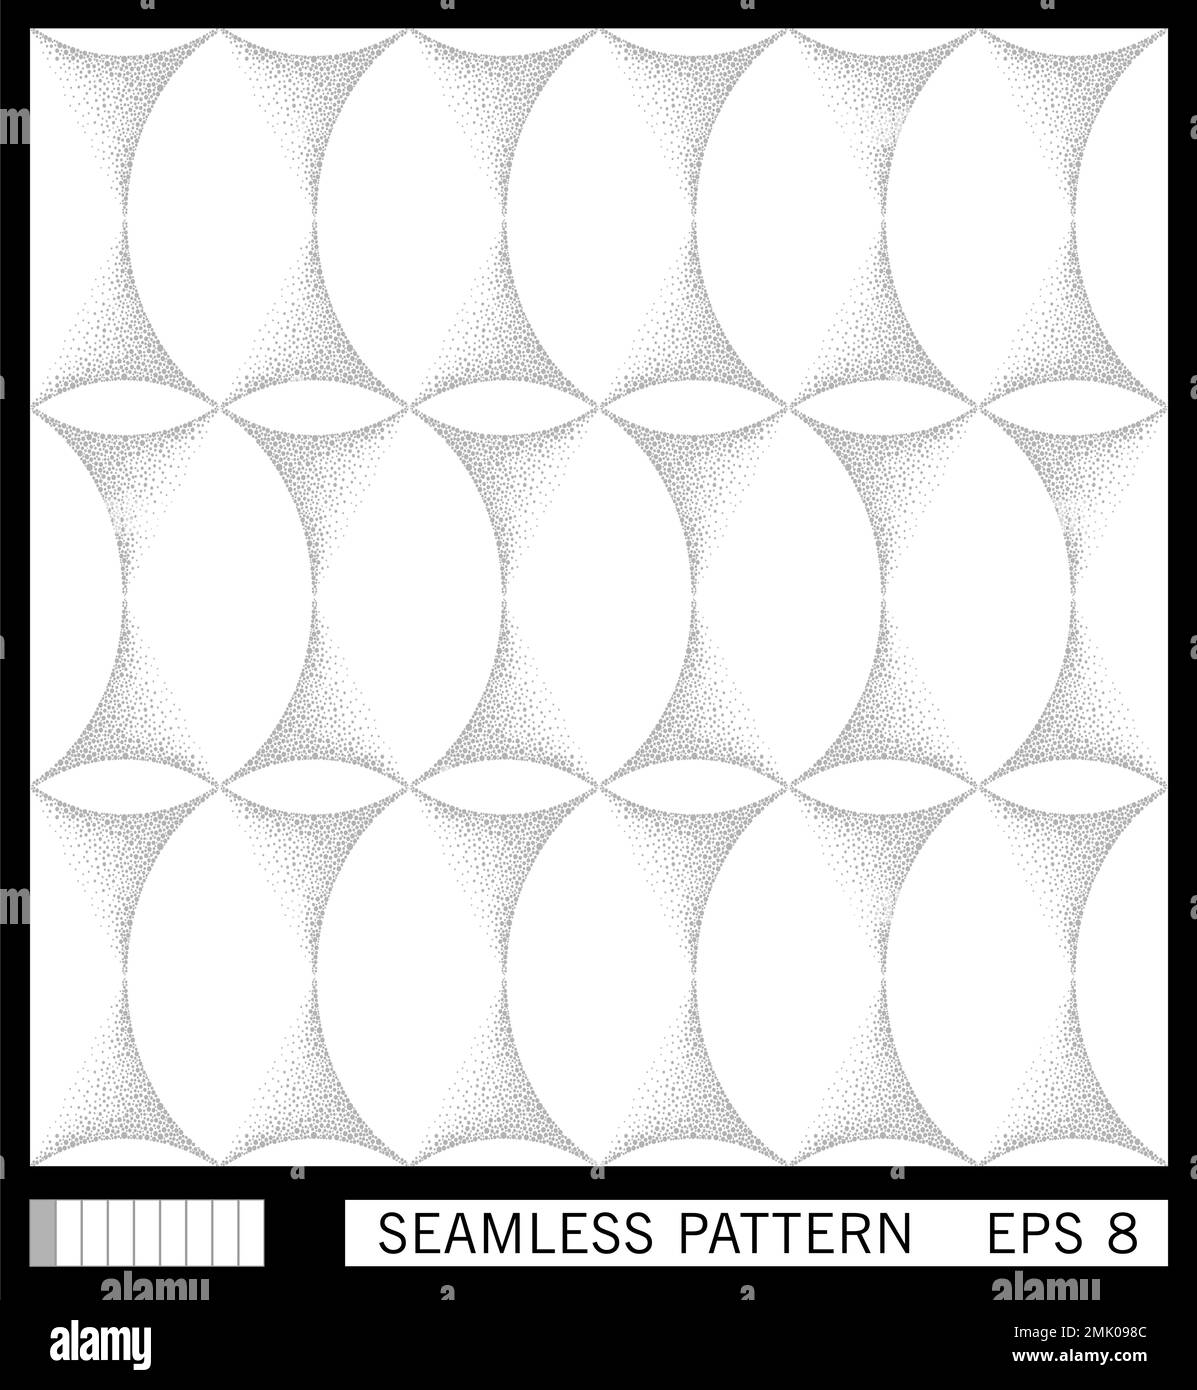 Seamless pattern. Shaded intersecting rings. Stipple halftone dotted texture. Retrofuturistic vector art Stock Vector